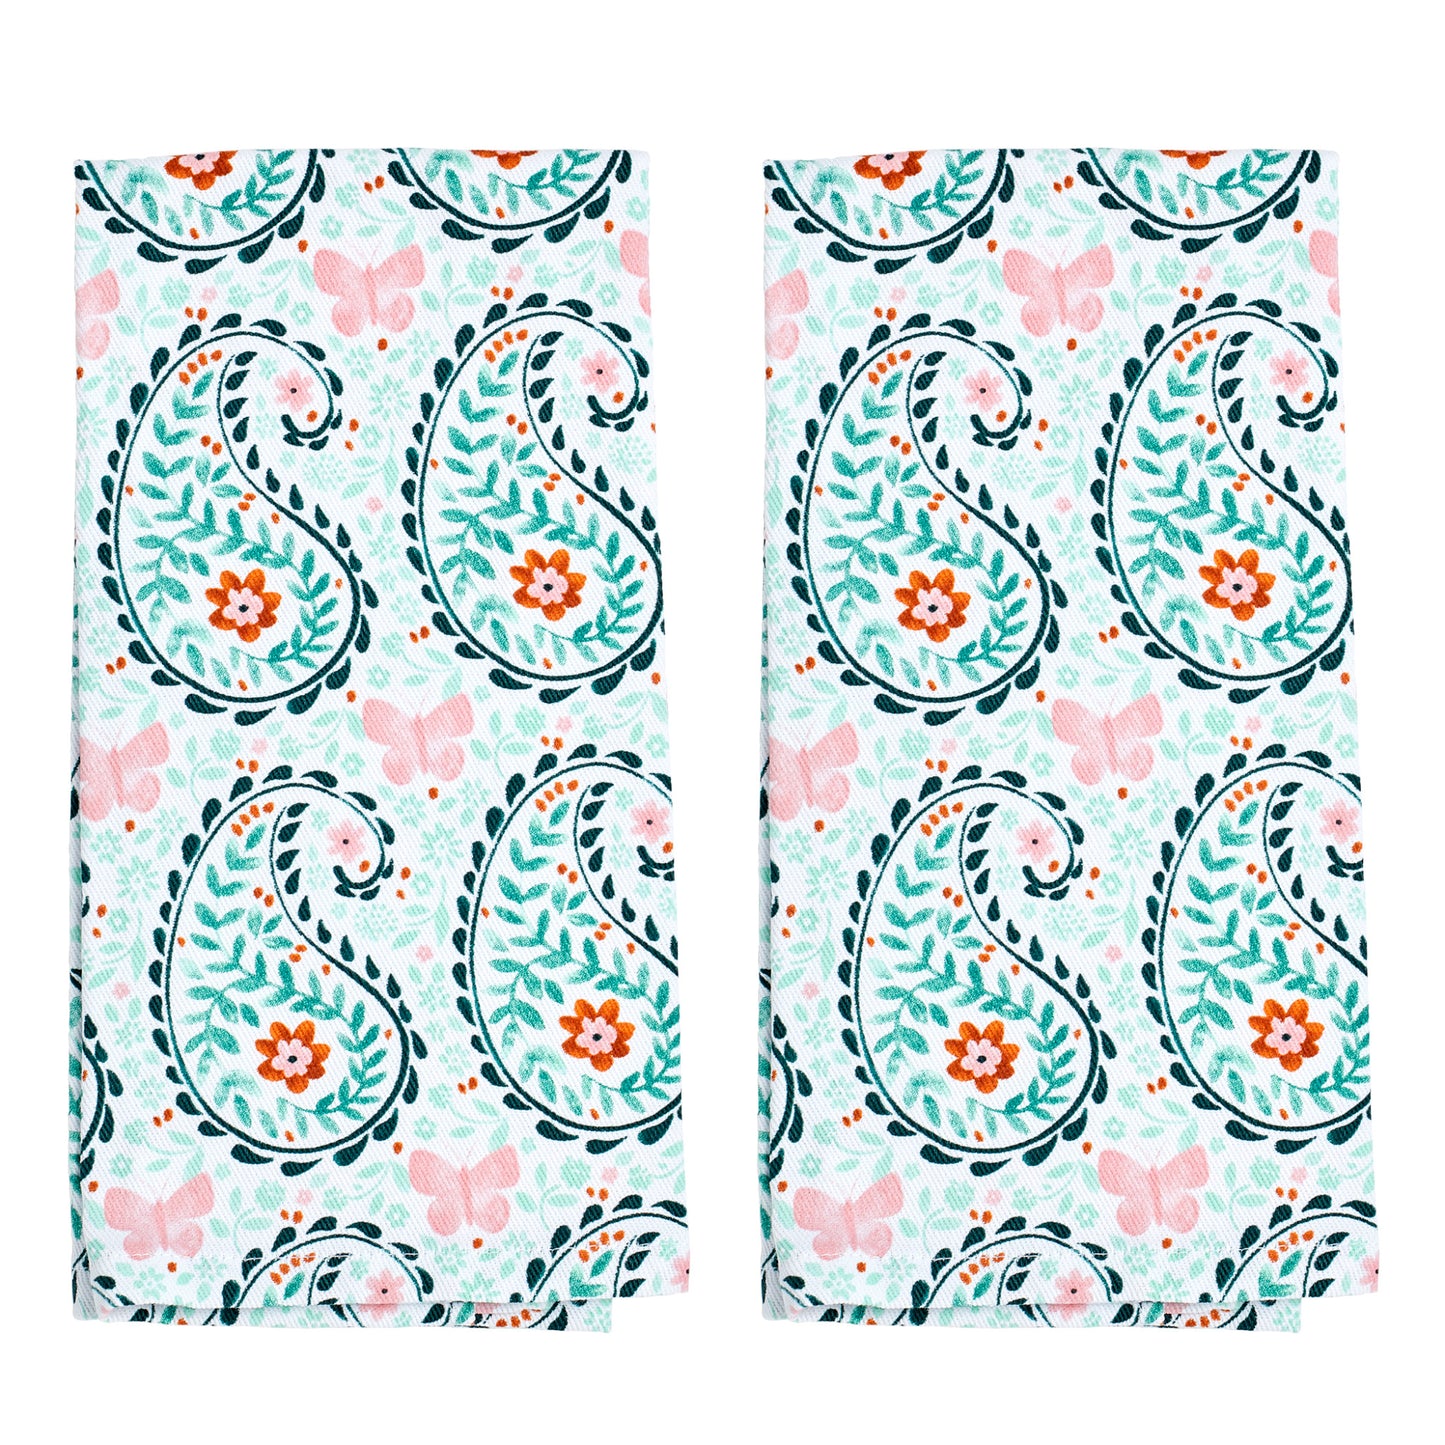 Dolly Paisley Towels - Set of 2